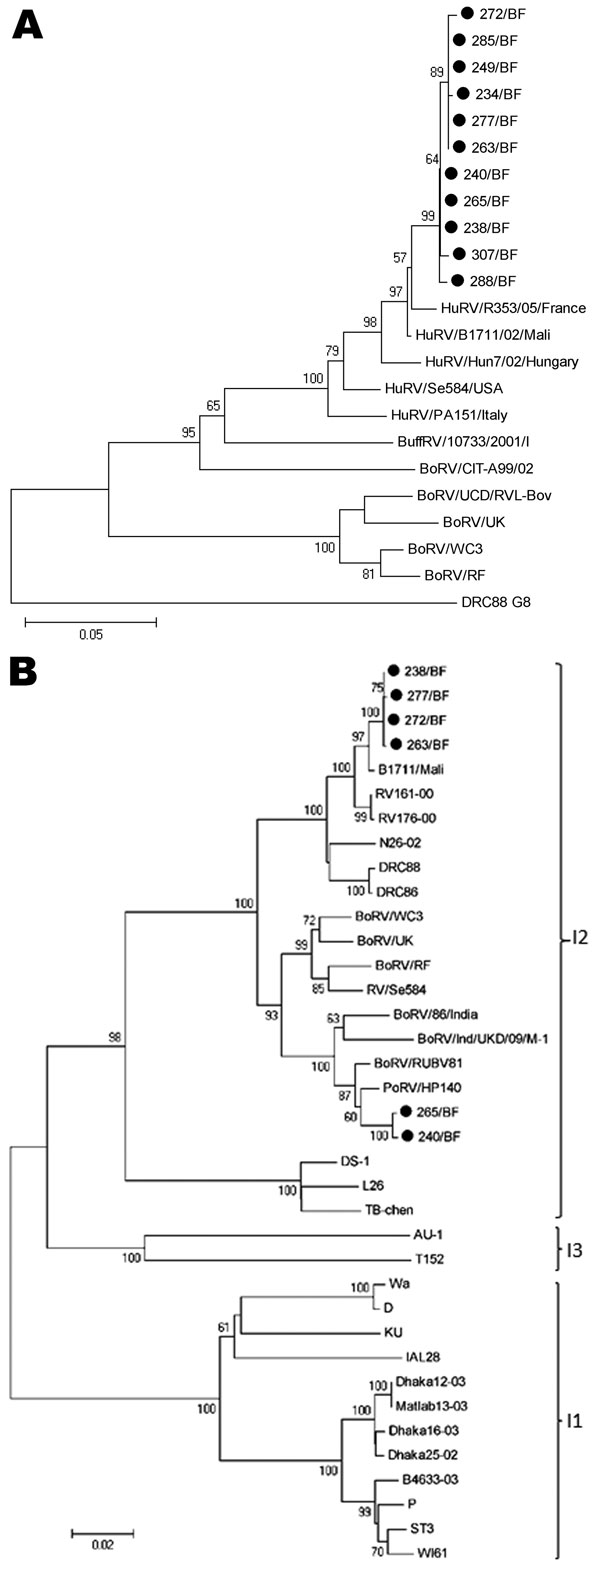 Phylogenetic analysis of partial sequences of A) viral protein (VP) 7 genes of the Burkina Faso G6P[6] rotavirus (ROTAV) strains (nt 135–796), with G8 strain DRC88 as an outgroup. GenBank accession numbers for VP7 genes of reference strains are available in Technical Appendix Table 4. B) VP6 genes (nt 145–1217) of the G6P[6] ROTAV strains from Burkina Faso, with I2 genotype specificity and reference strains from genotypes I1, I2, and I3. GenBank accession numbers. for VP6 genes of reference stra